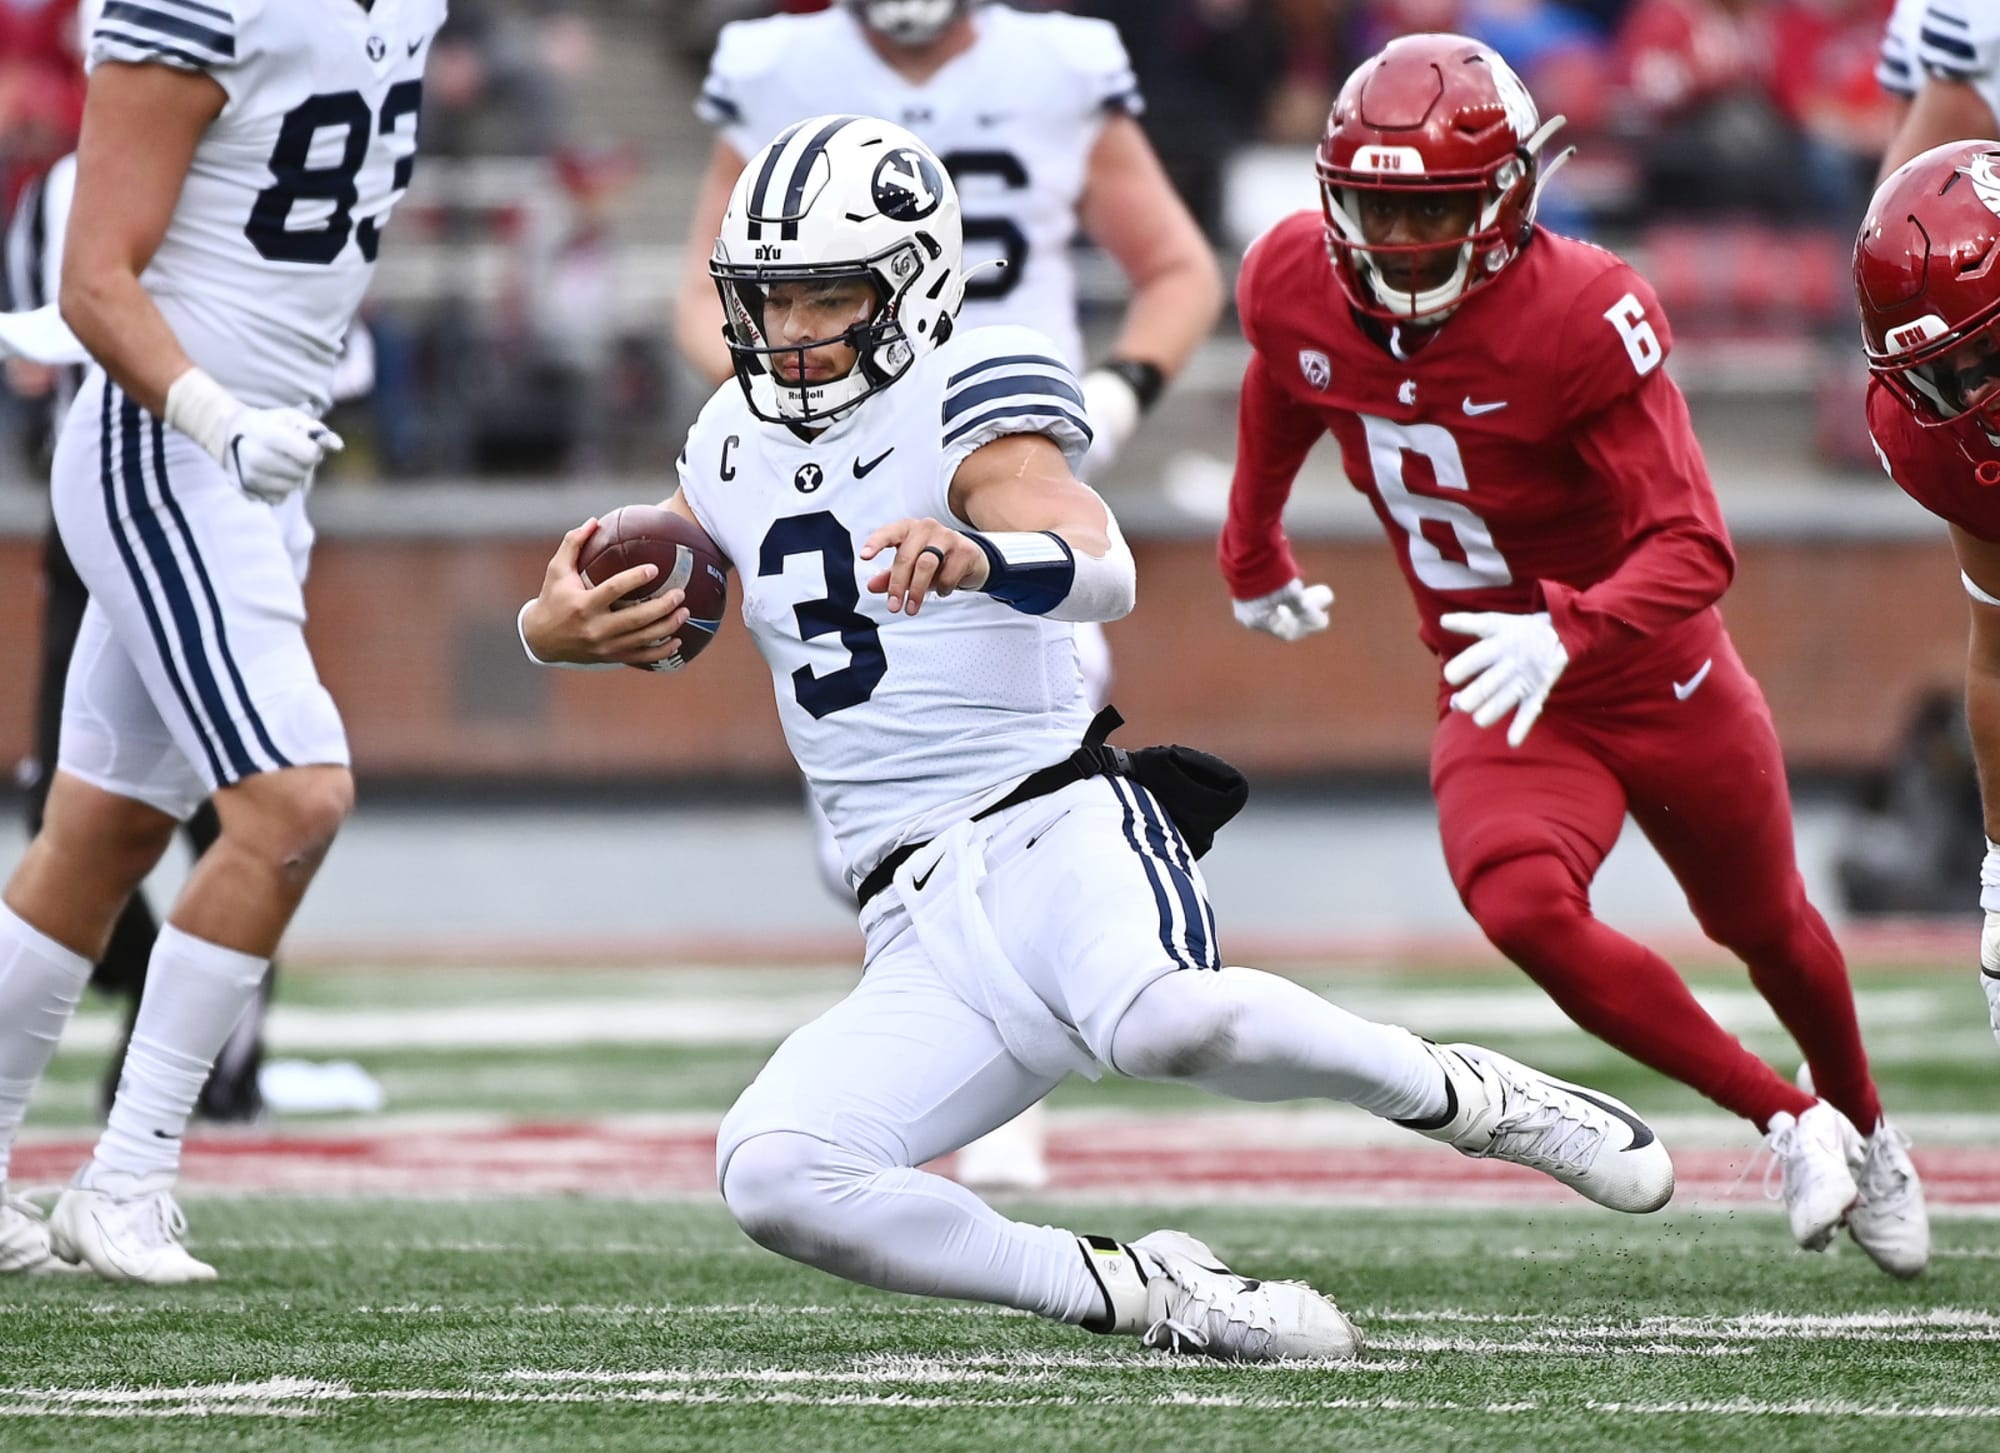 BYU Football: Are the Cougars really a top 10 team?